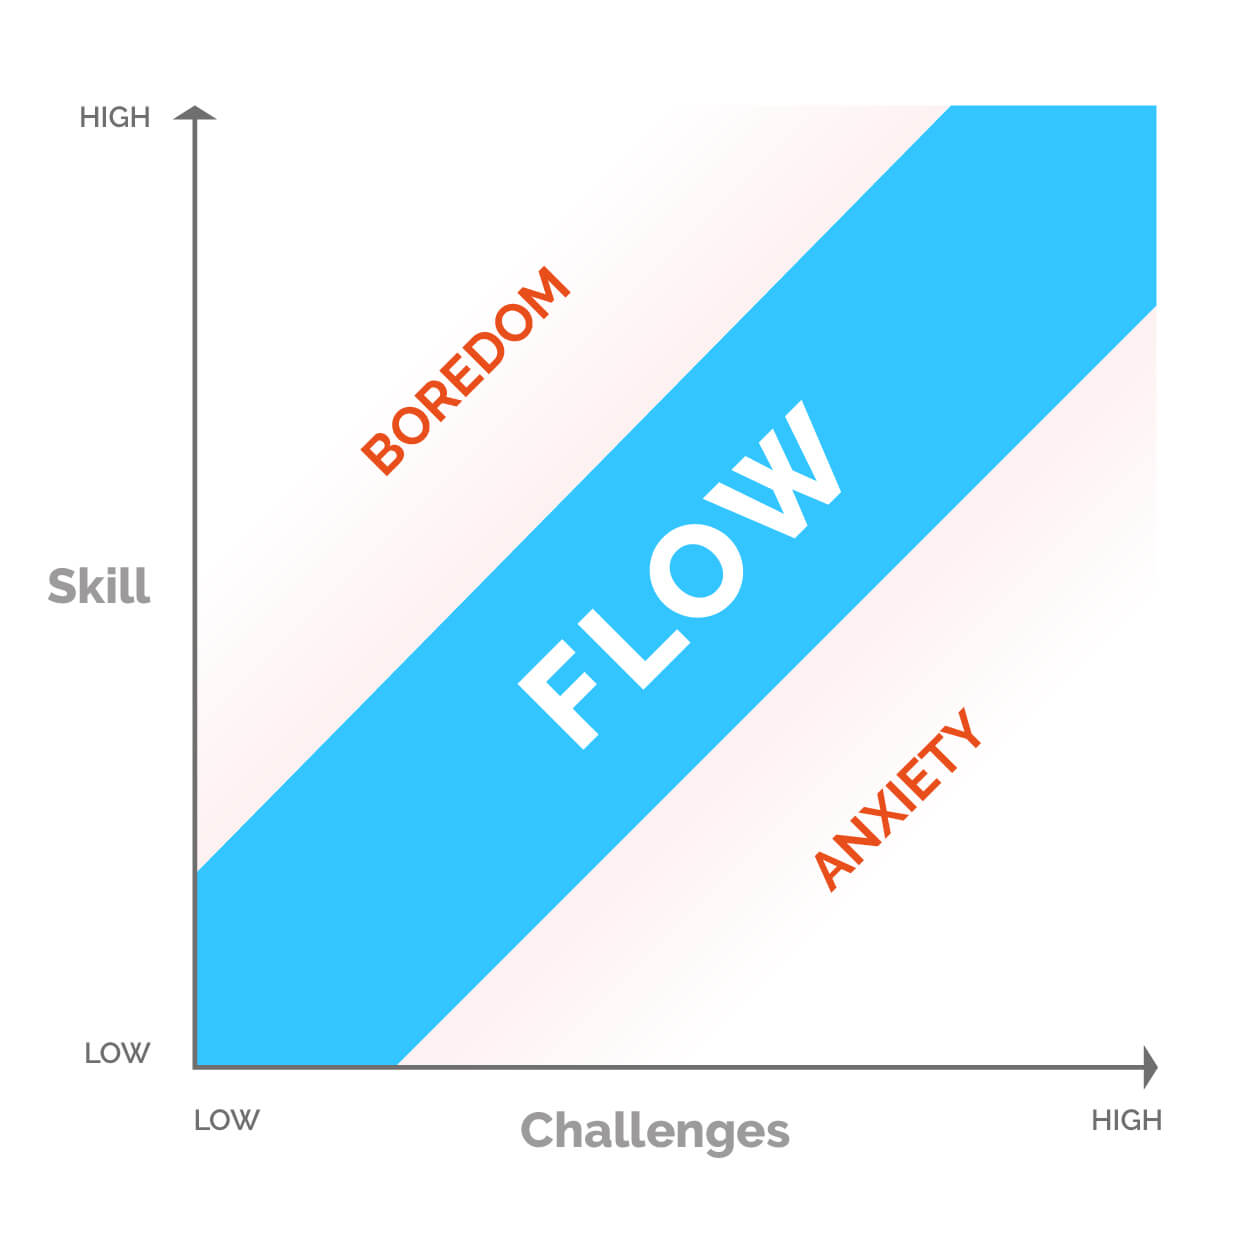 Graphic adaptation from Csikszentmihalyi (1975/2000) model of flow state